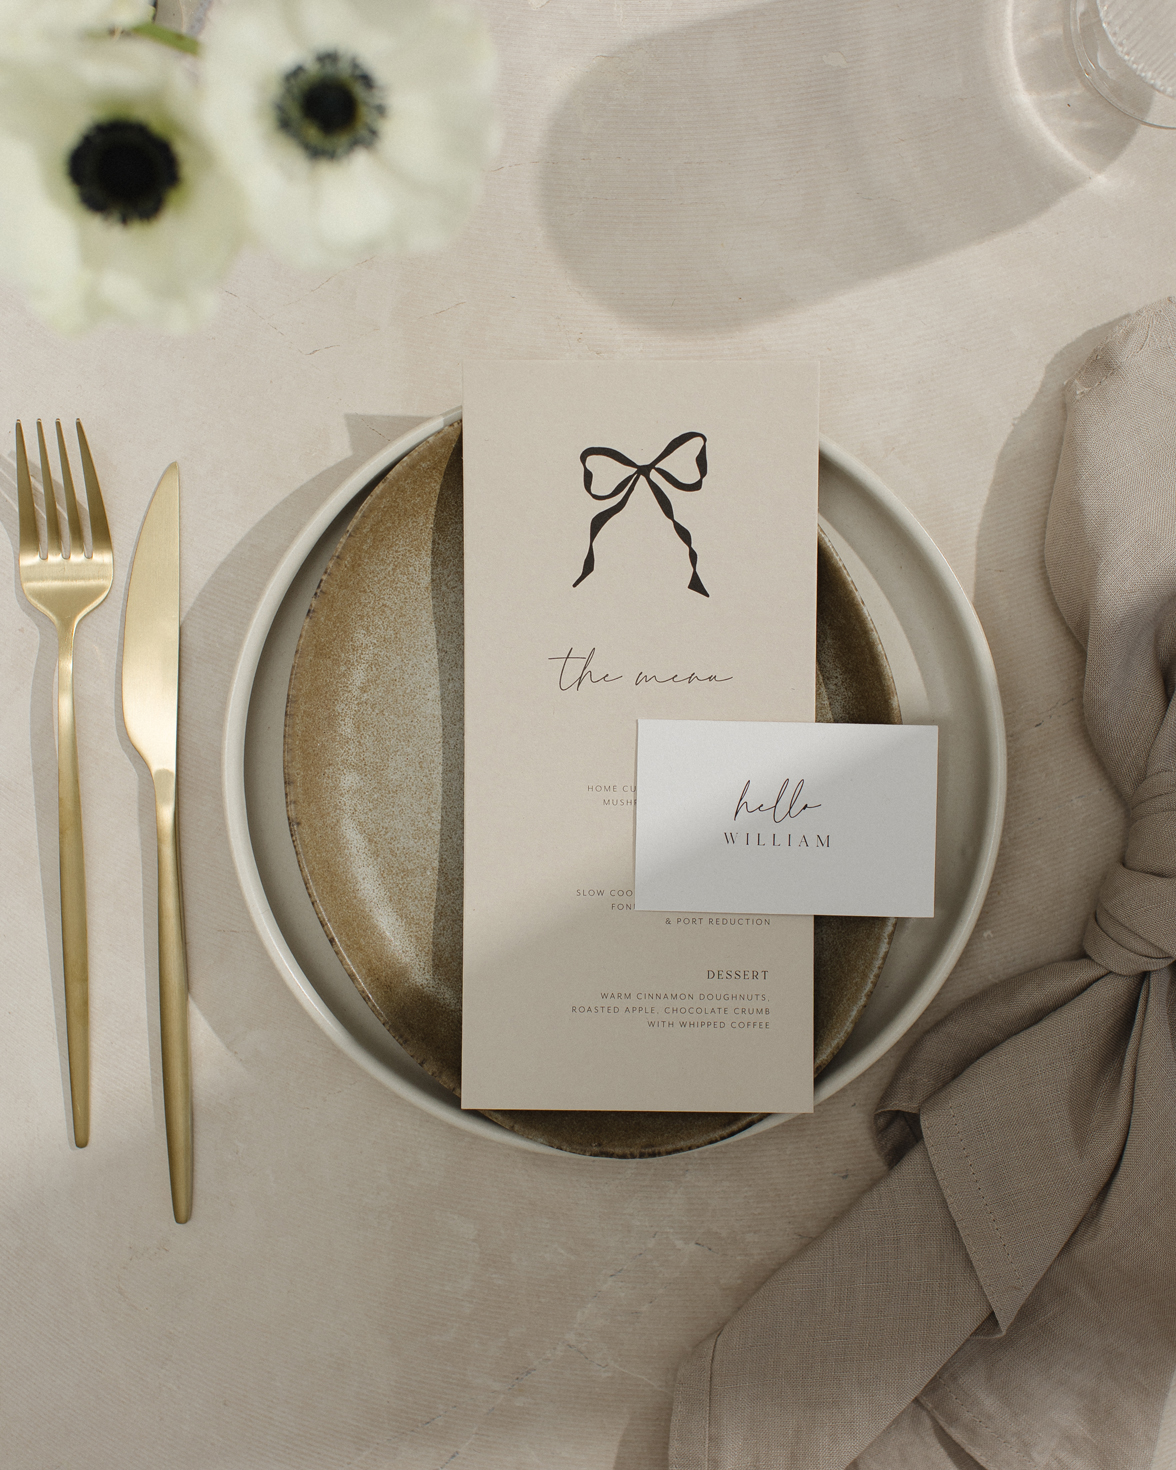 Wedding menu in stone colour with black hand drawn bow. White flat rectangle place card with script font